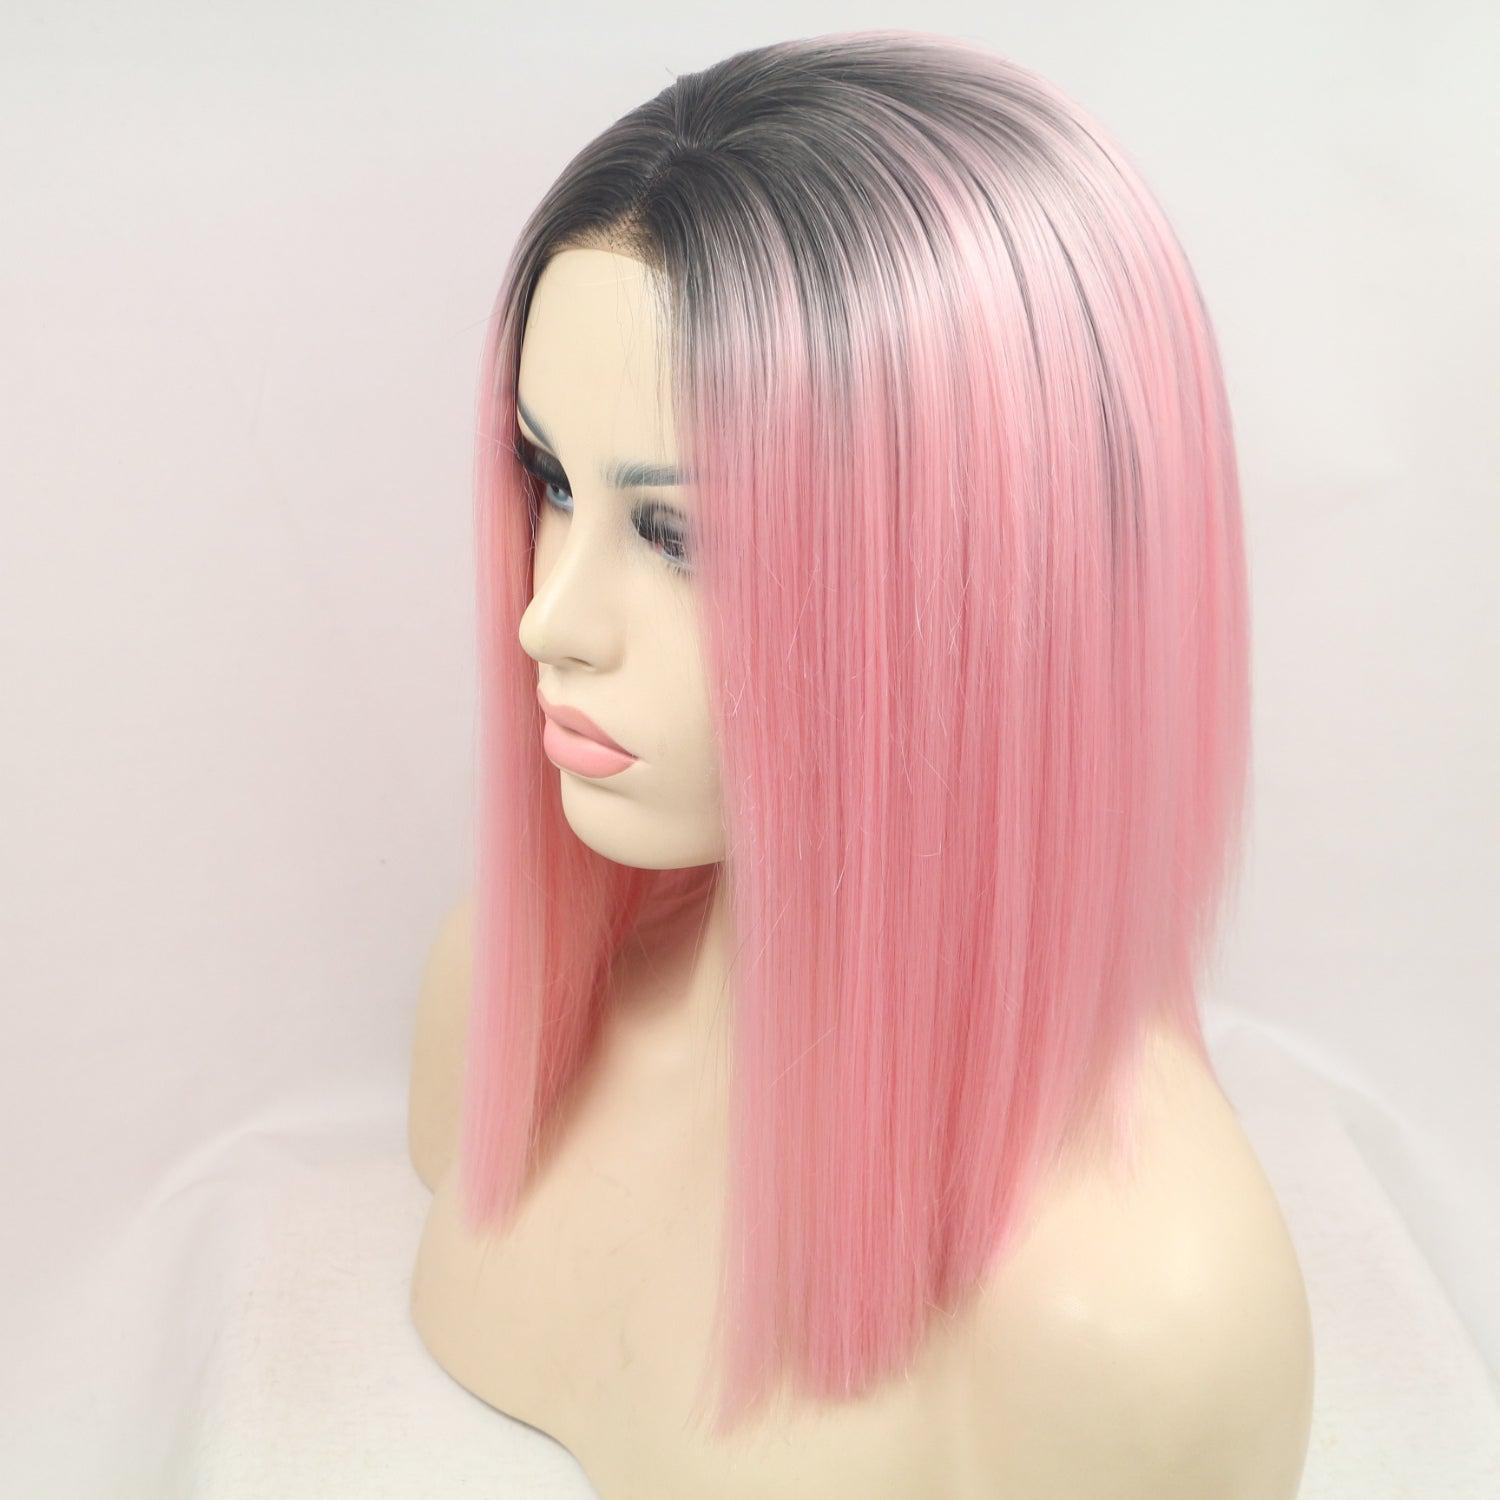 a mannequin head with pink and black hair